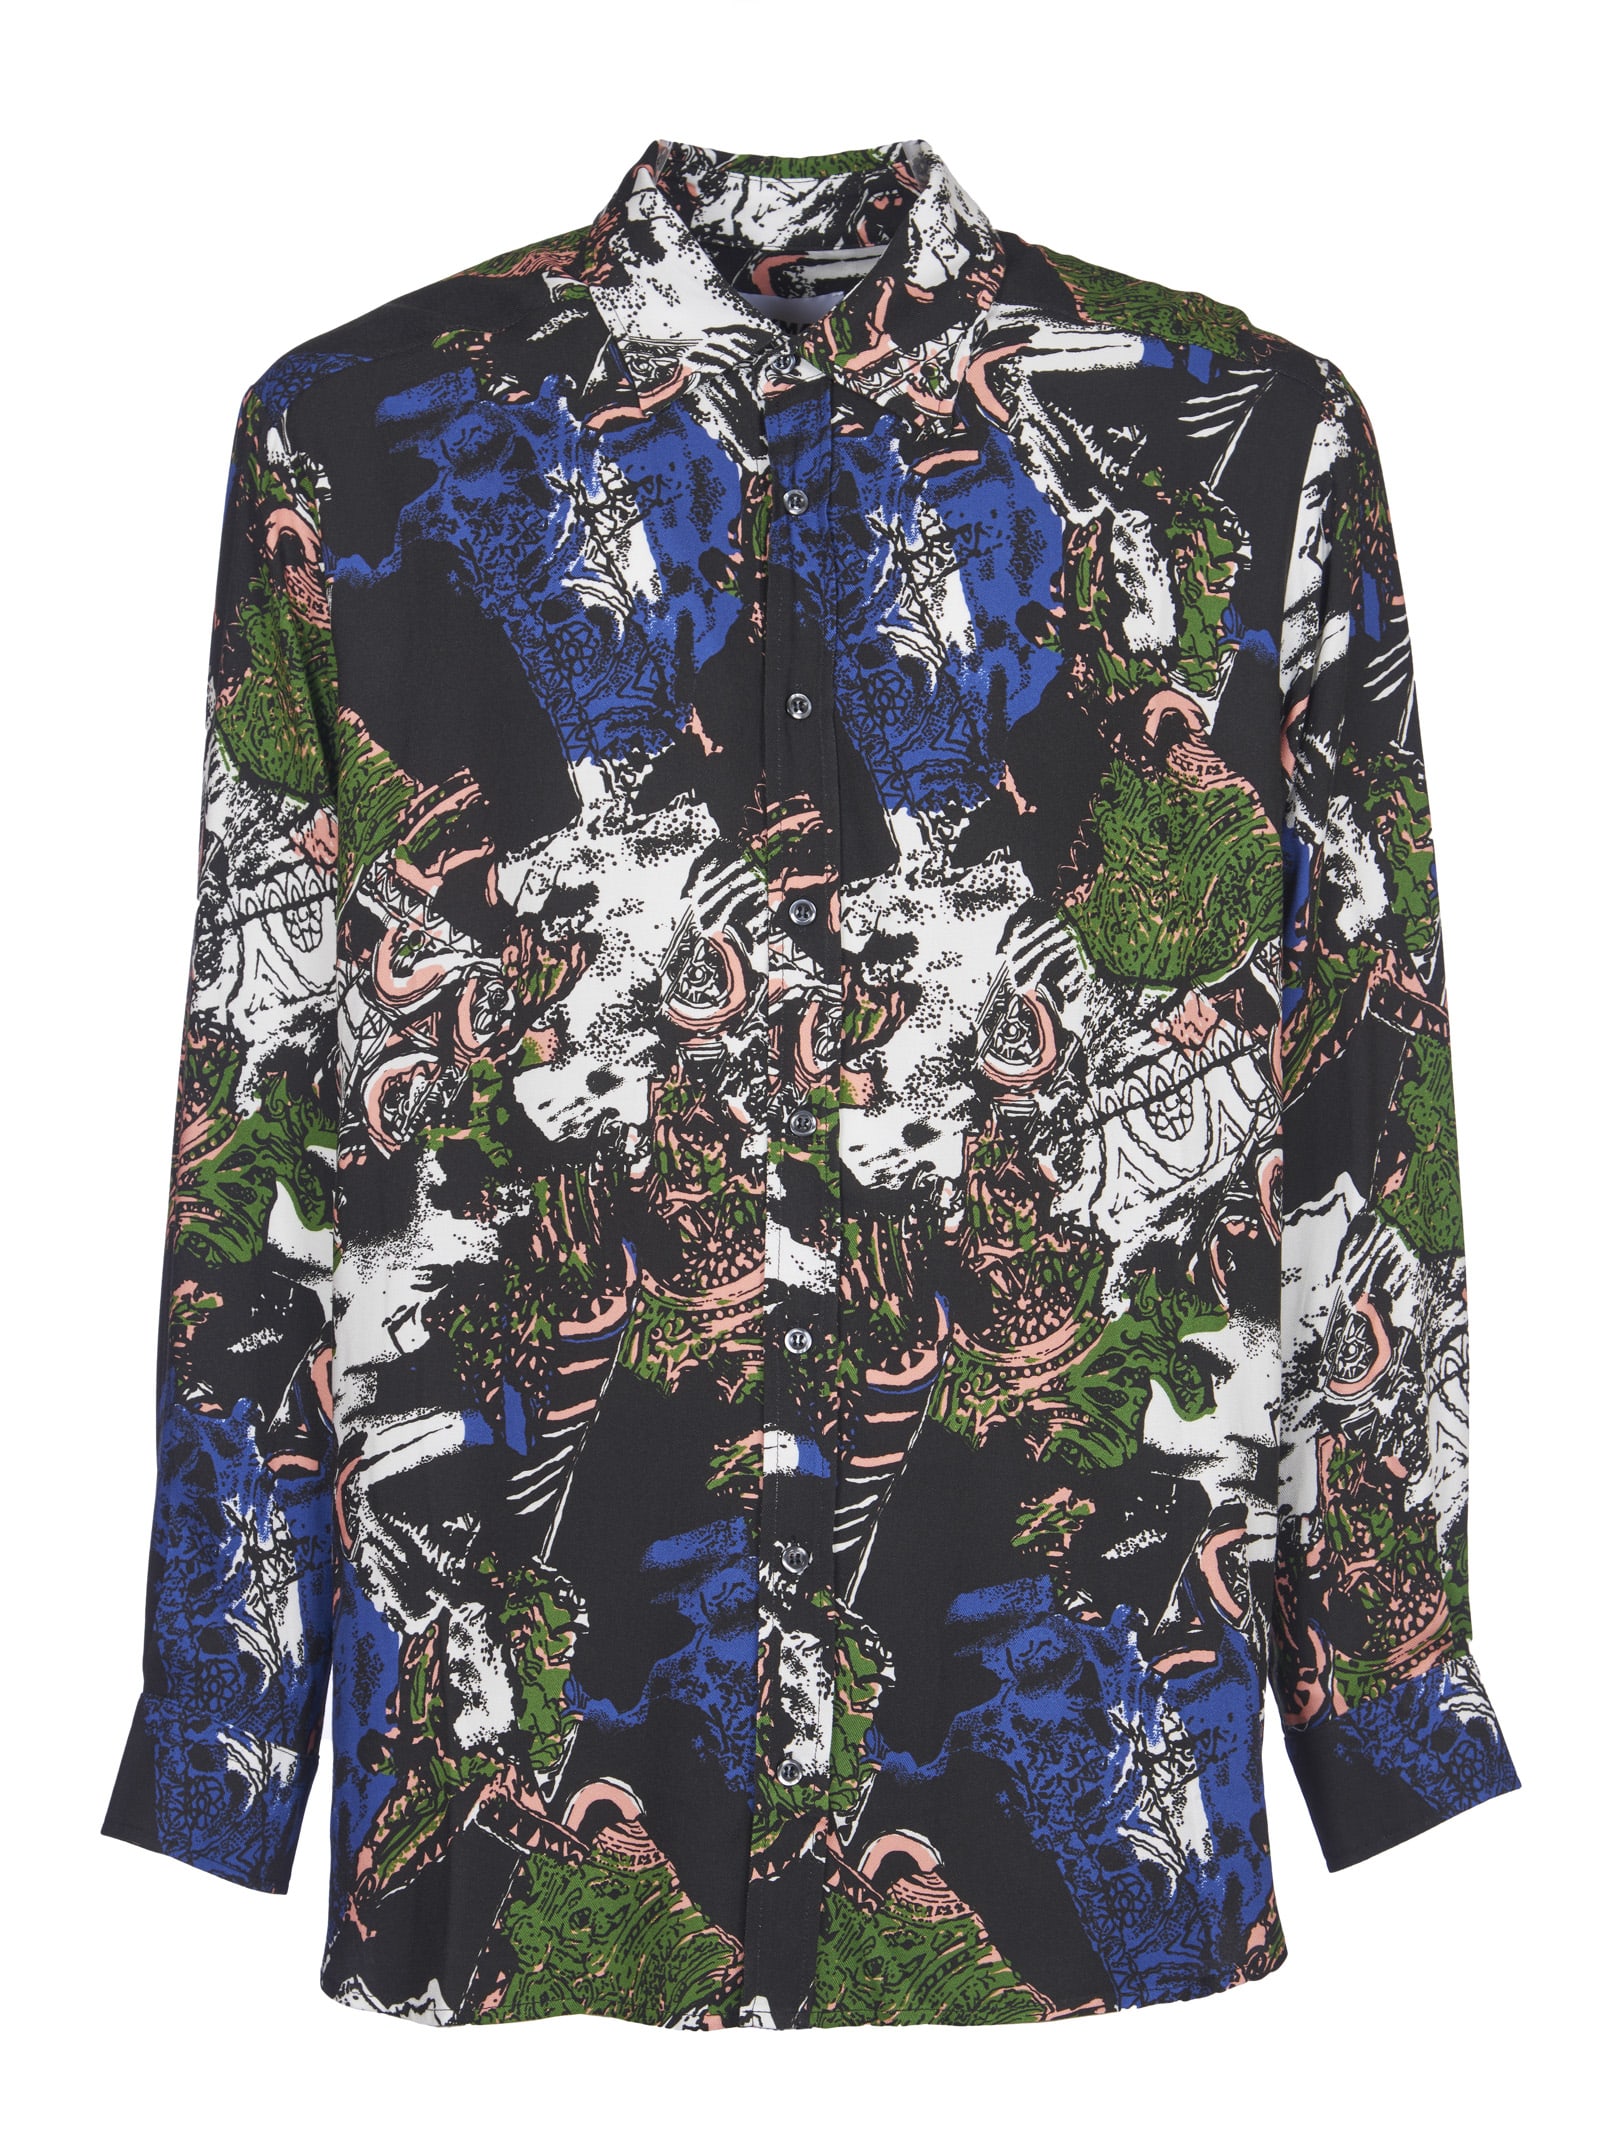 Waxman Brothers Multicolor Pattern Print Over Shirt